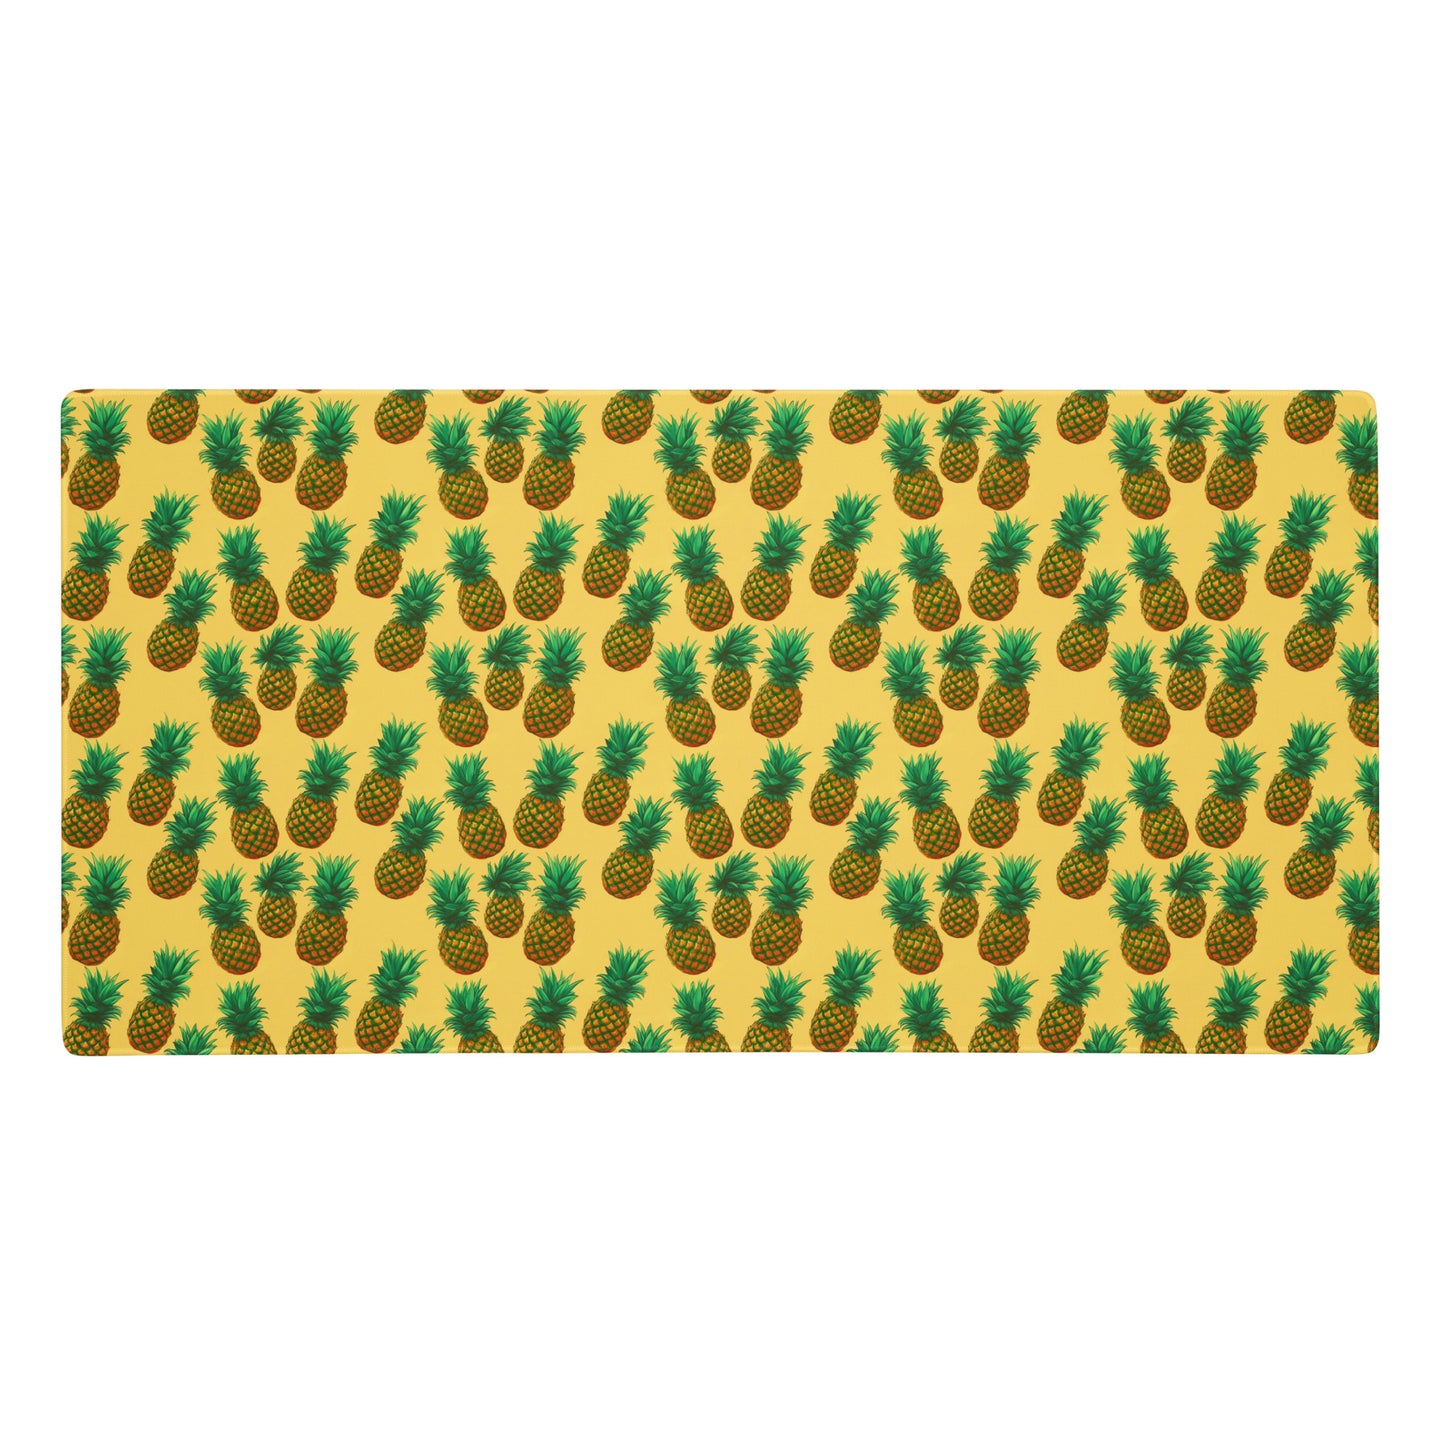 A 36" x 18" desk pad with pineapples all over it. Yellow in color.